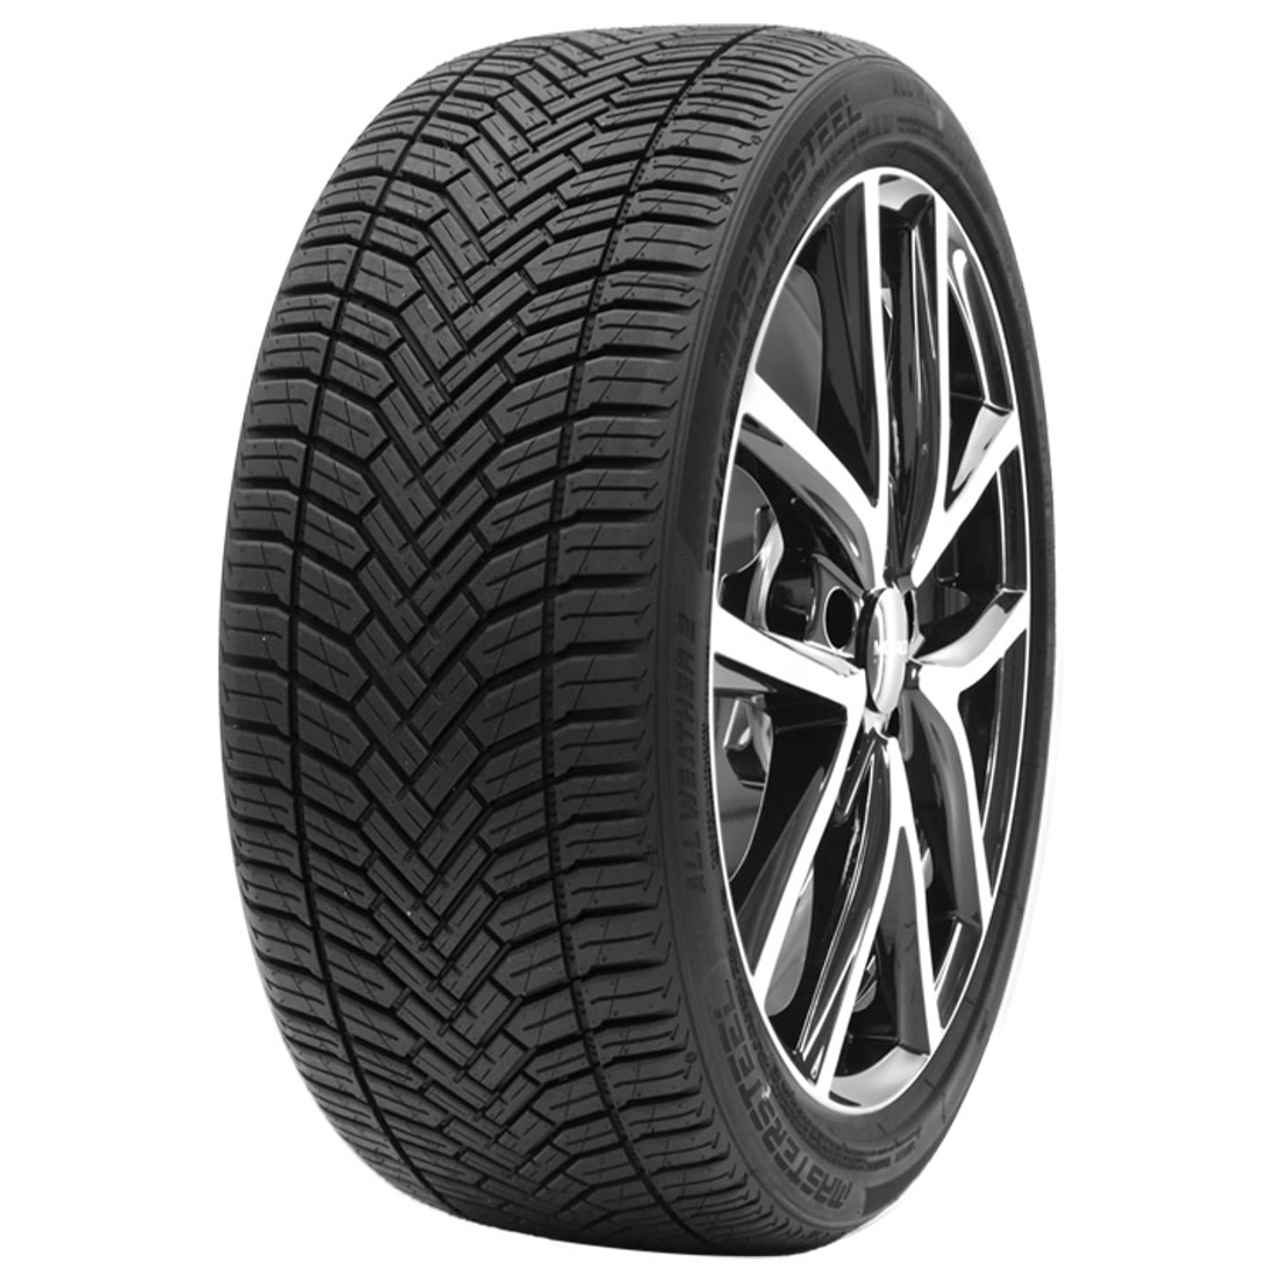 MASTERSTEEL ALL WEATHER 2 185/60R15 88H BSW